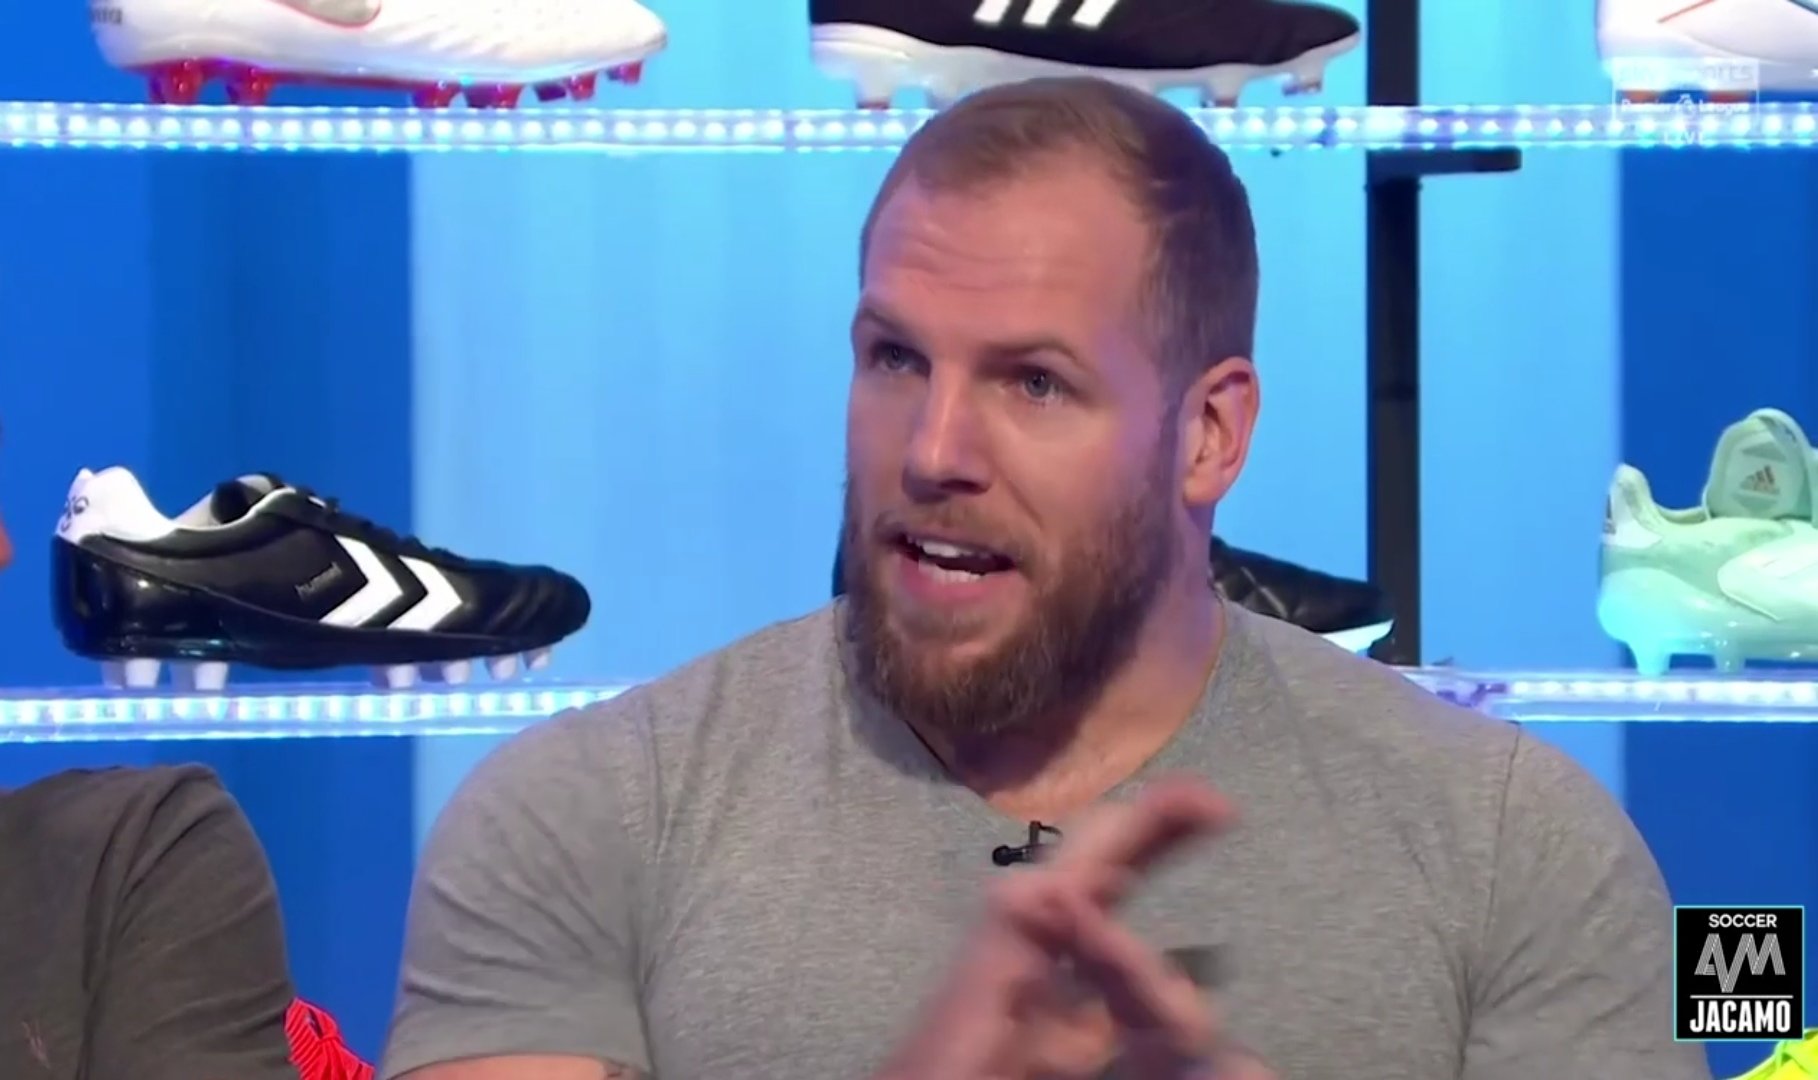 FOOTAGE: Haskell admits the truth about drunken video clip on Soccer AM